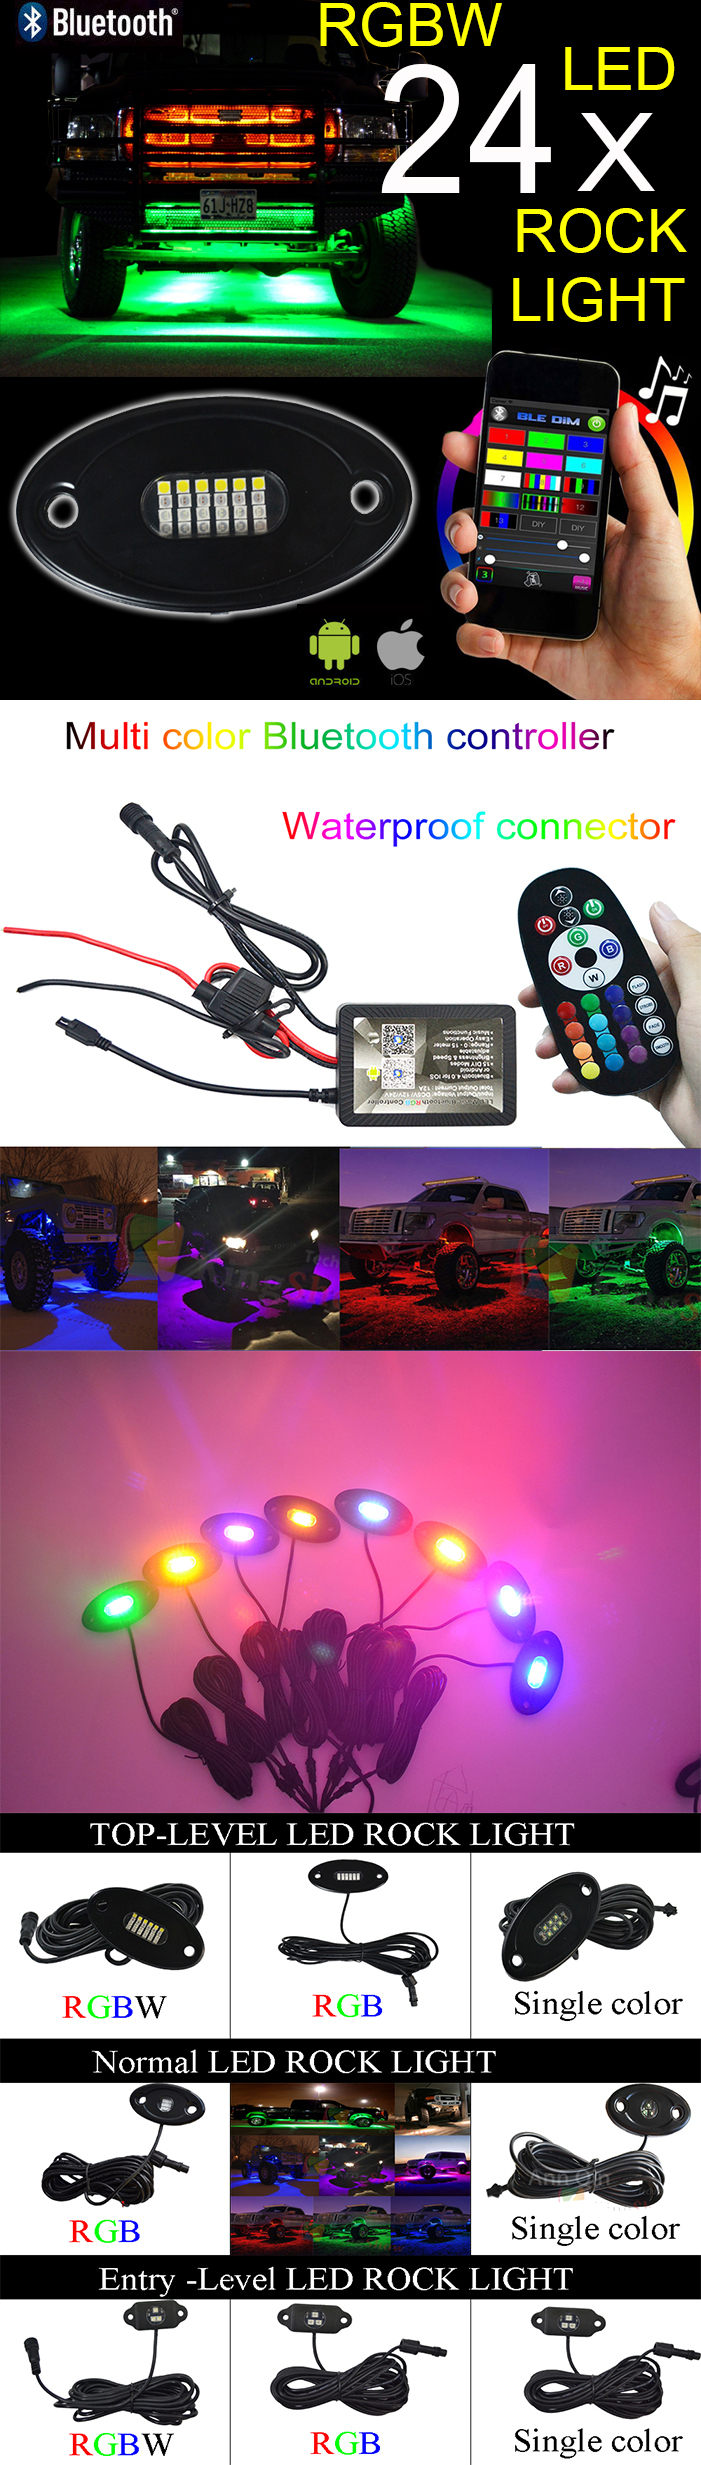 16 Pods RGBW LED Rock Lights - Multicolor Underglow Neon Light Kit with Blue-tooth Controller